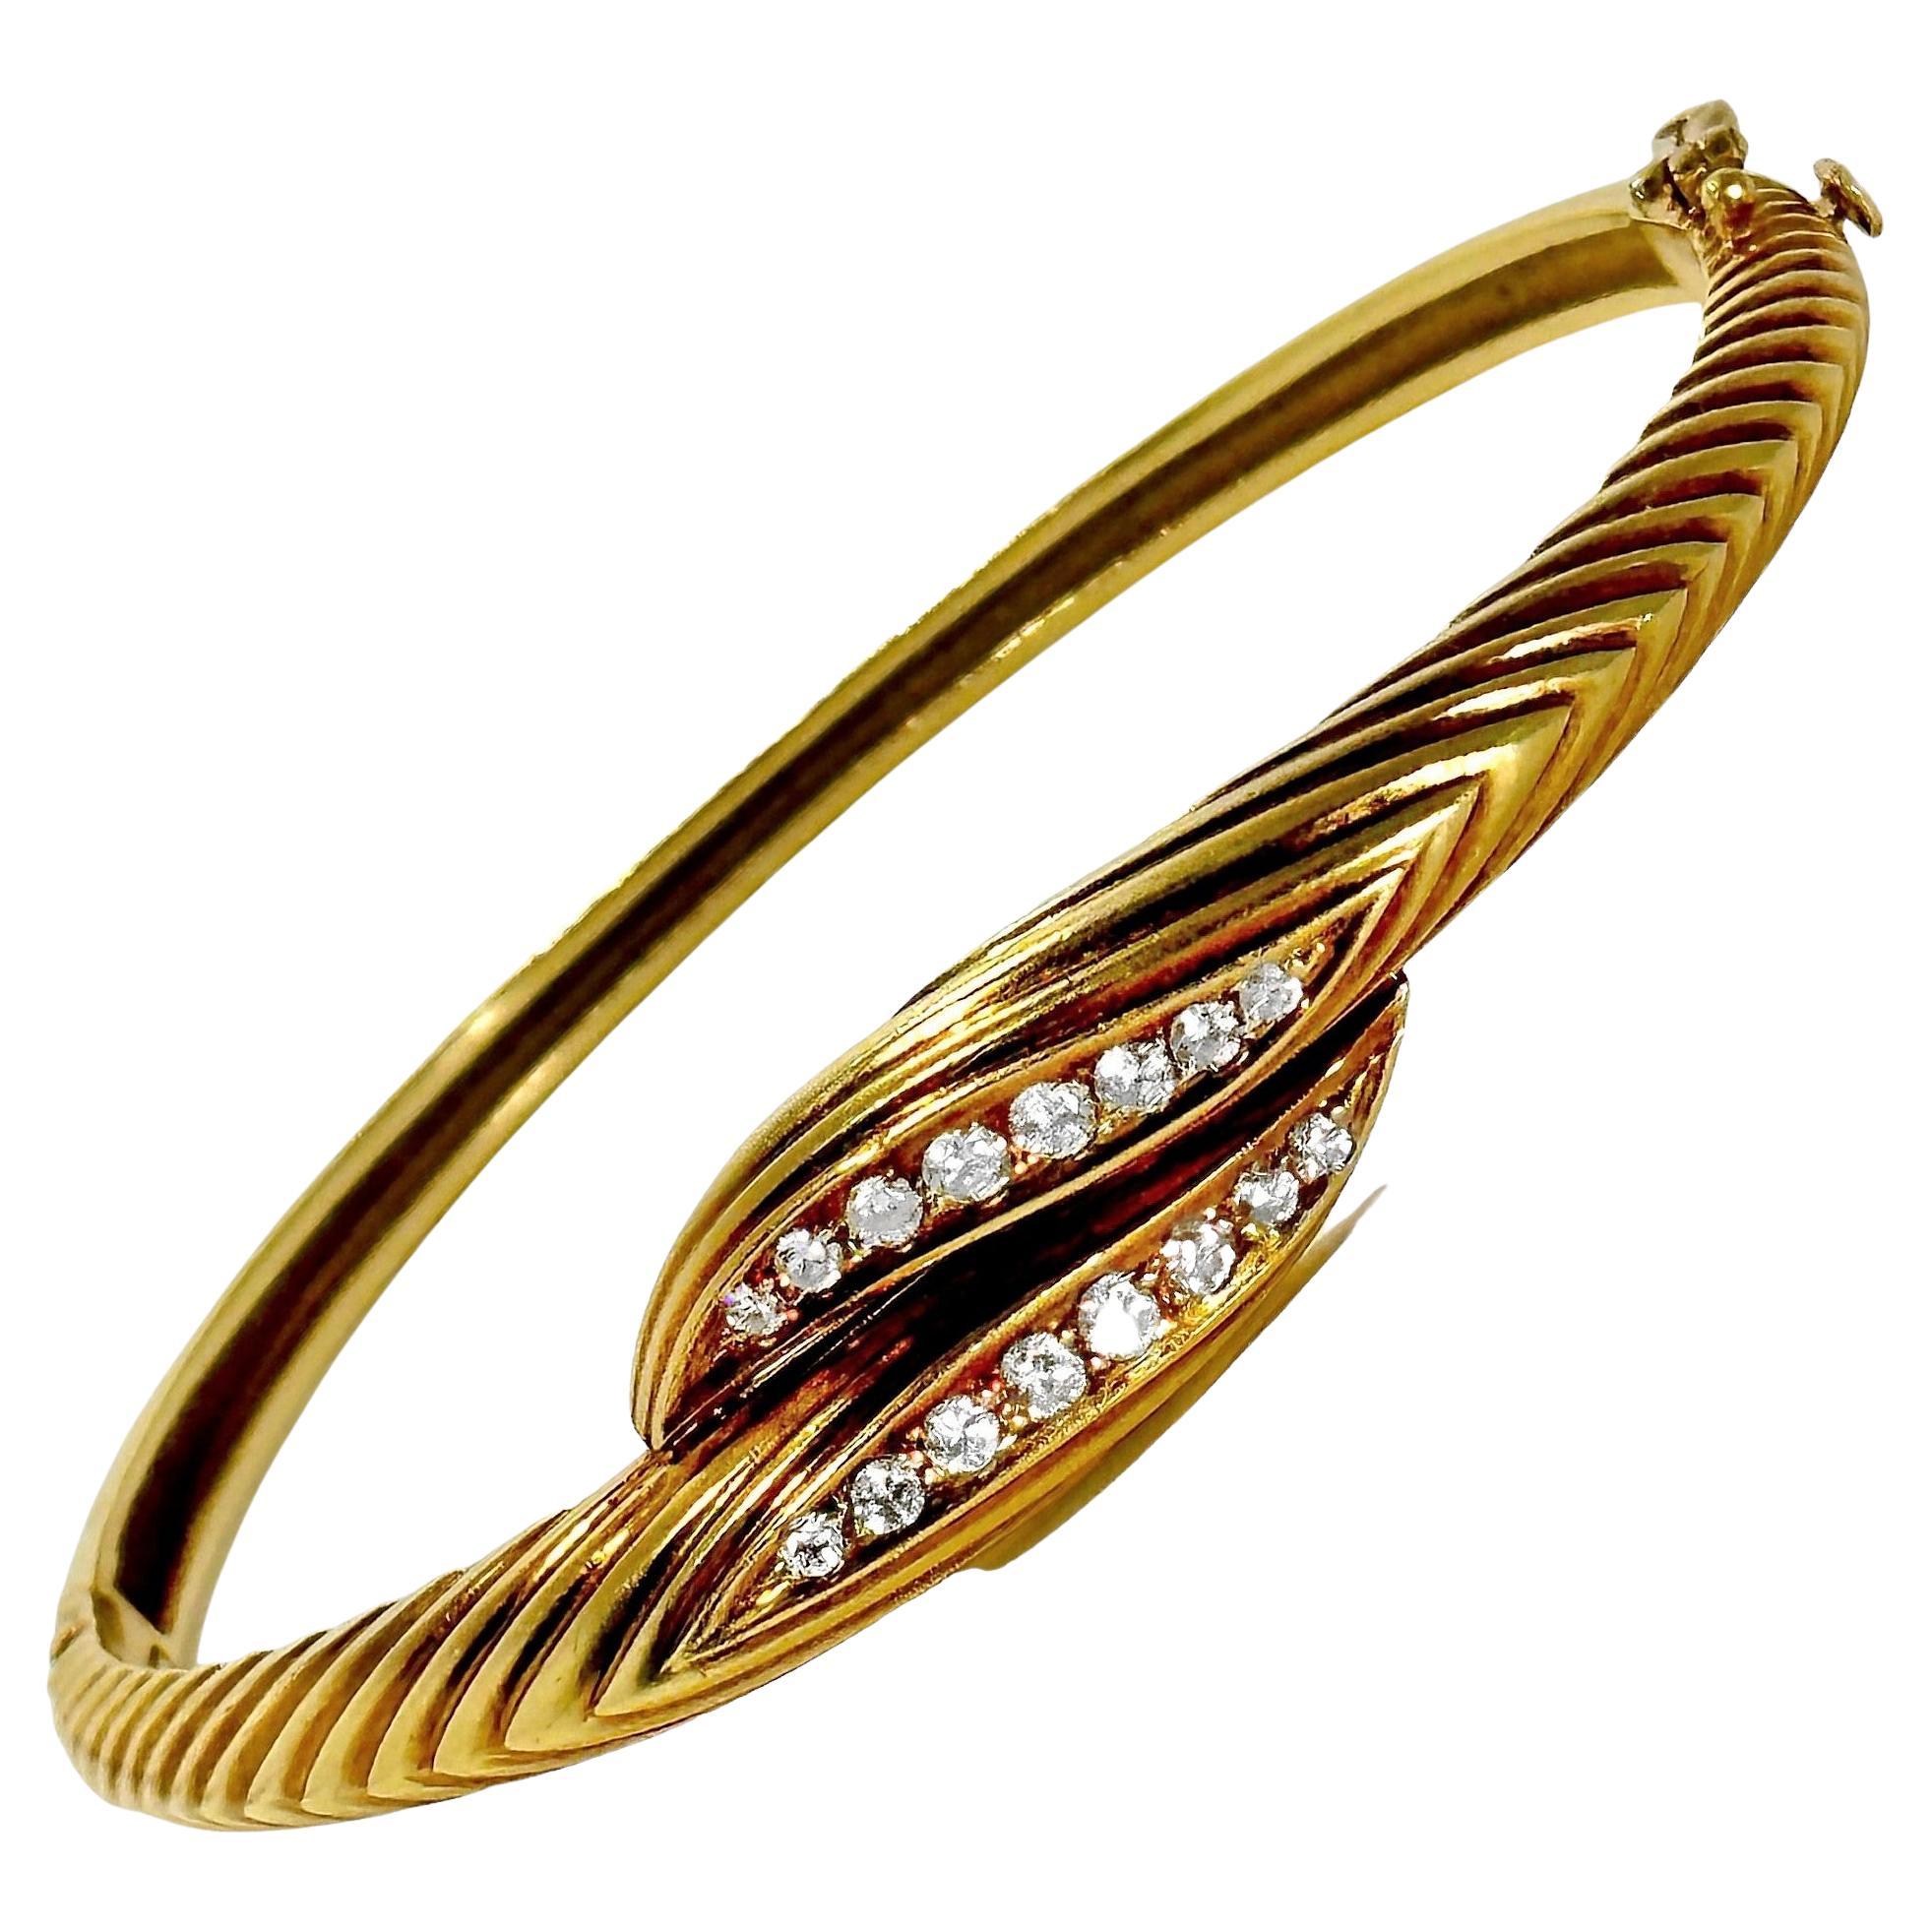 Delicate Vintage French Mid-20th Century Gold and Diamond Bangle Bracelet